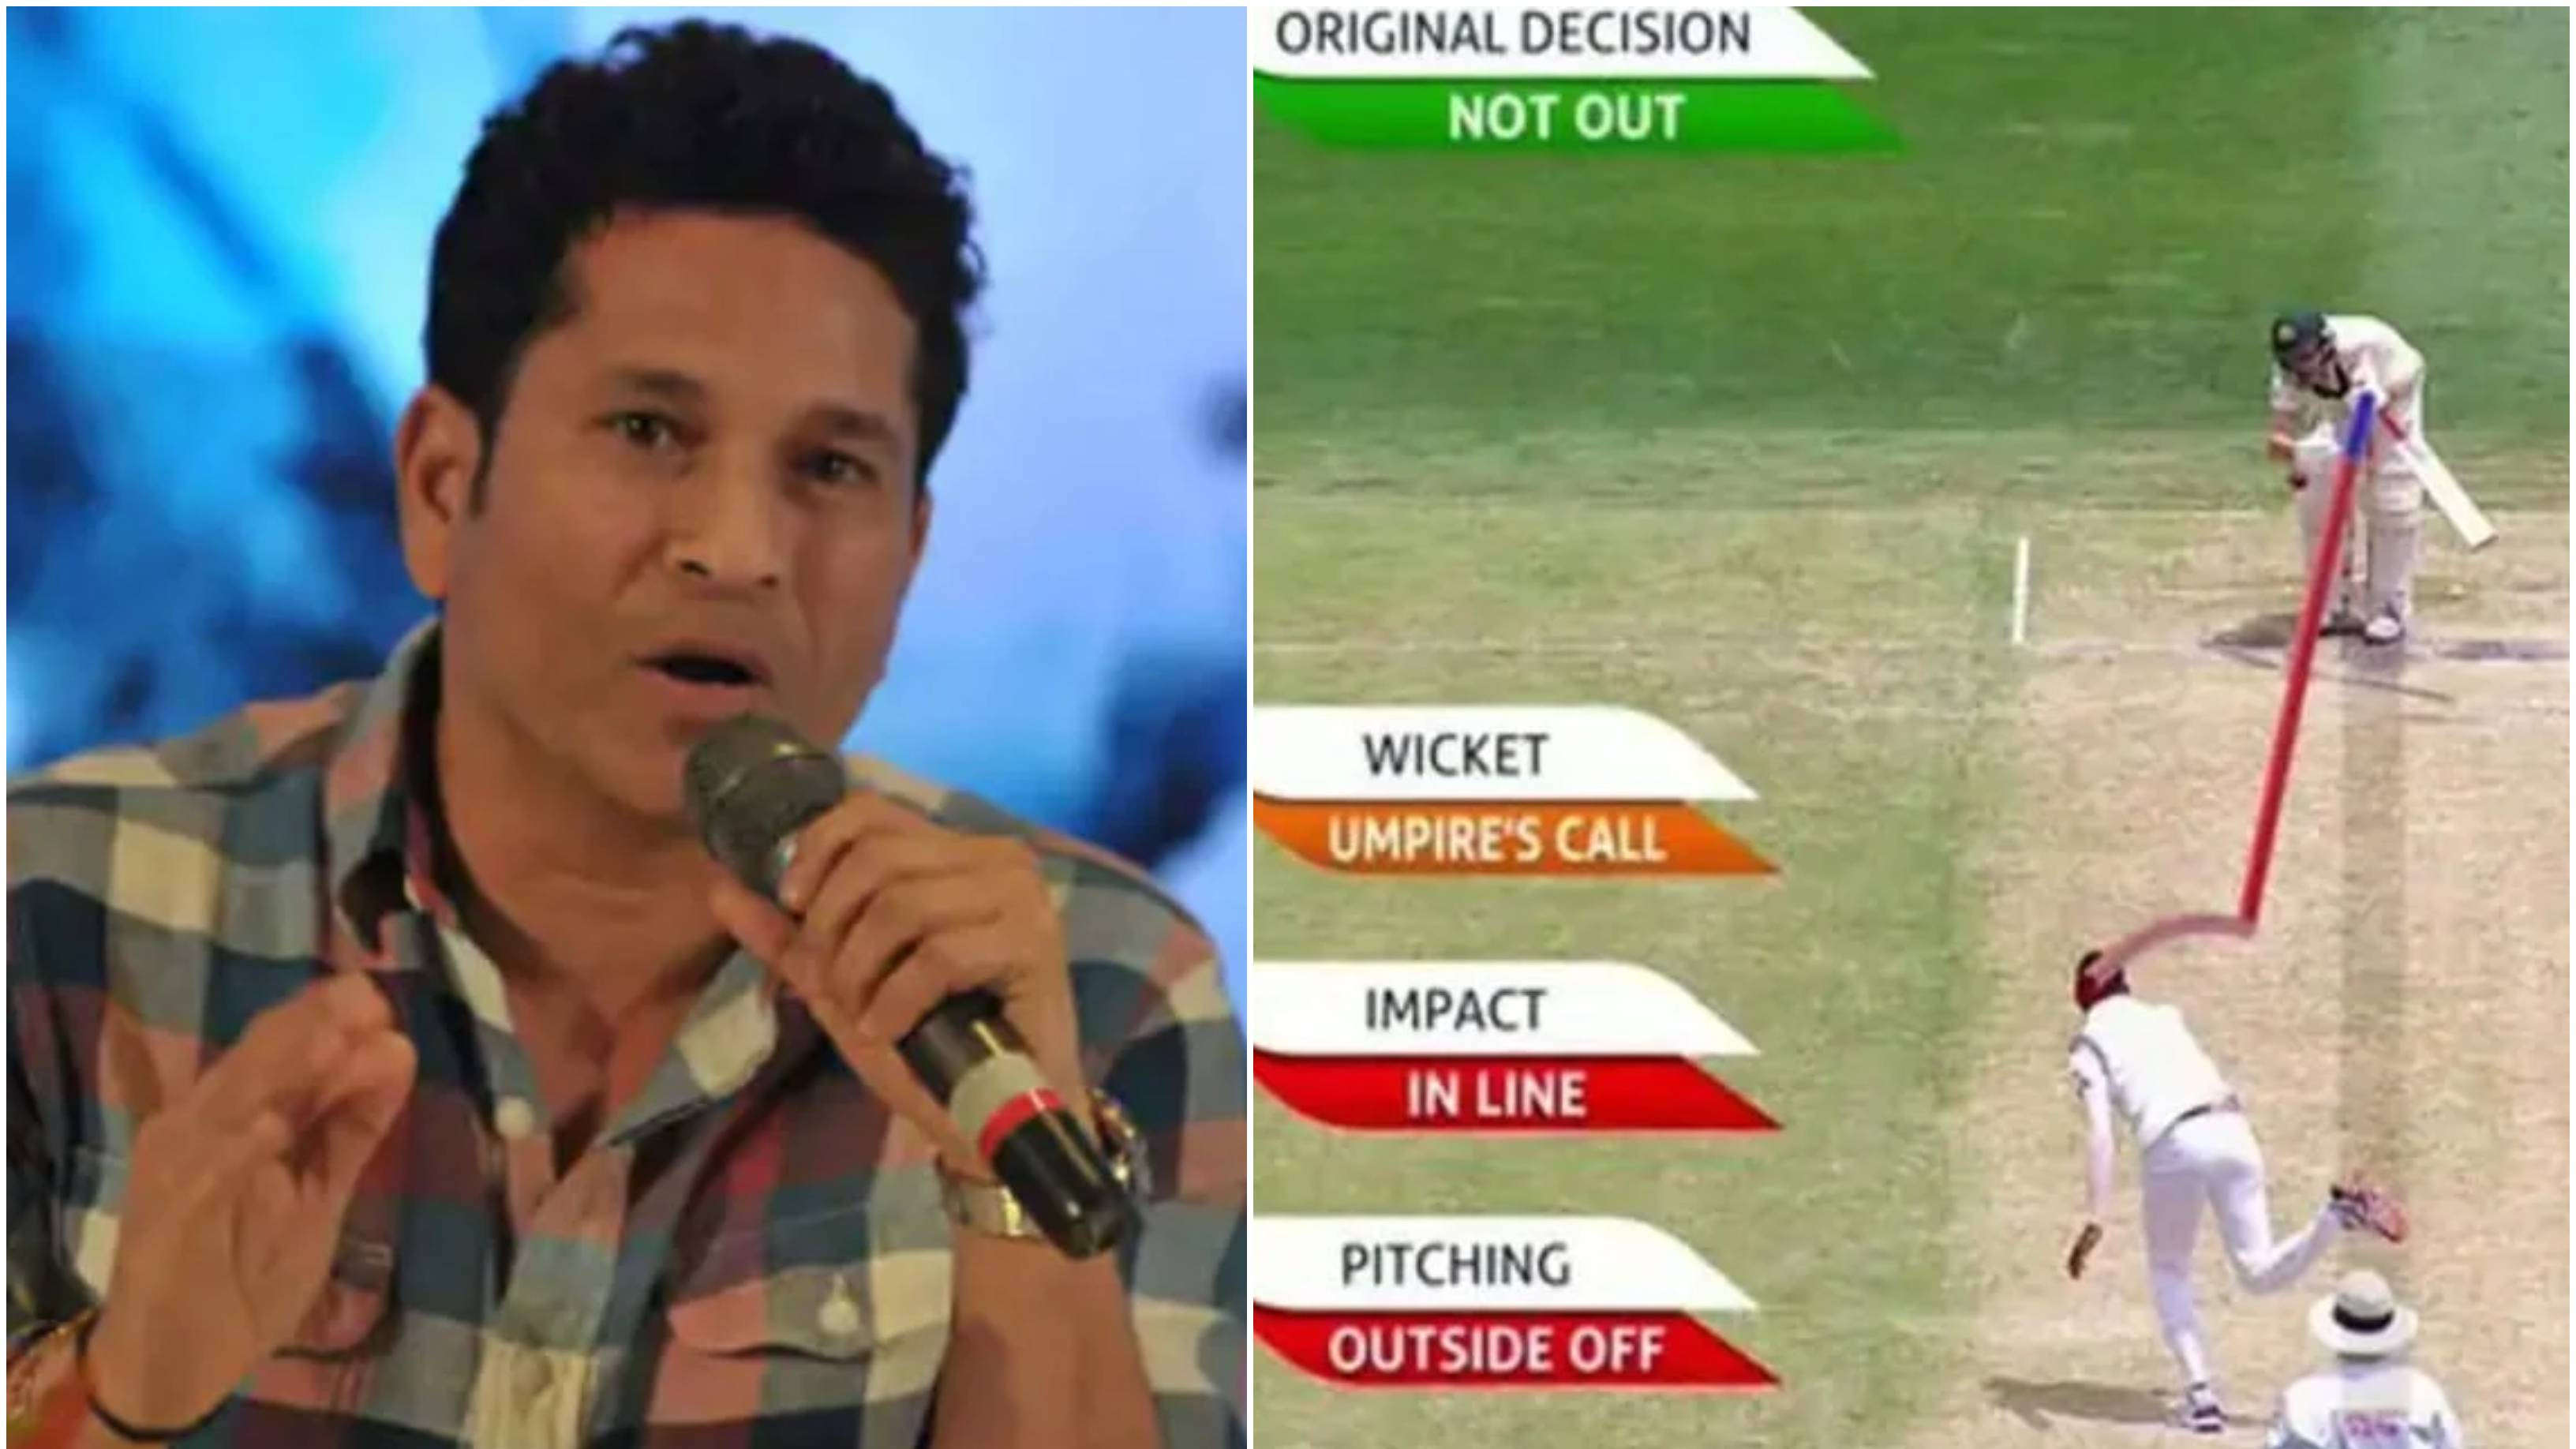 “If the ball is hitting the stumps, it’s out,” Sachin Tendulkar expresses reservations over current DRS format